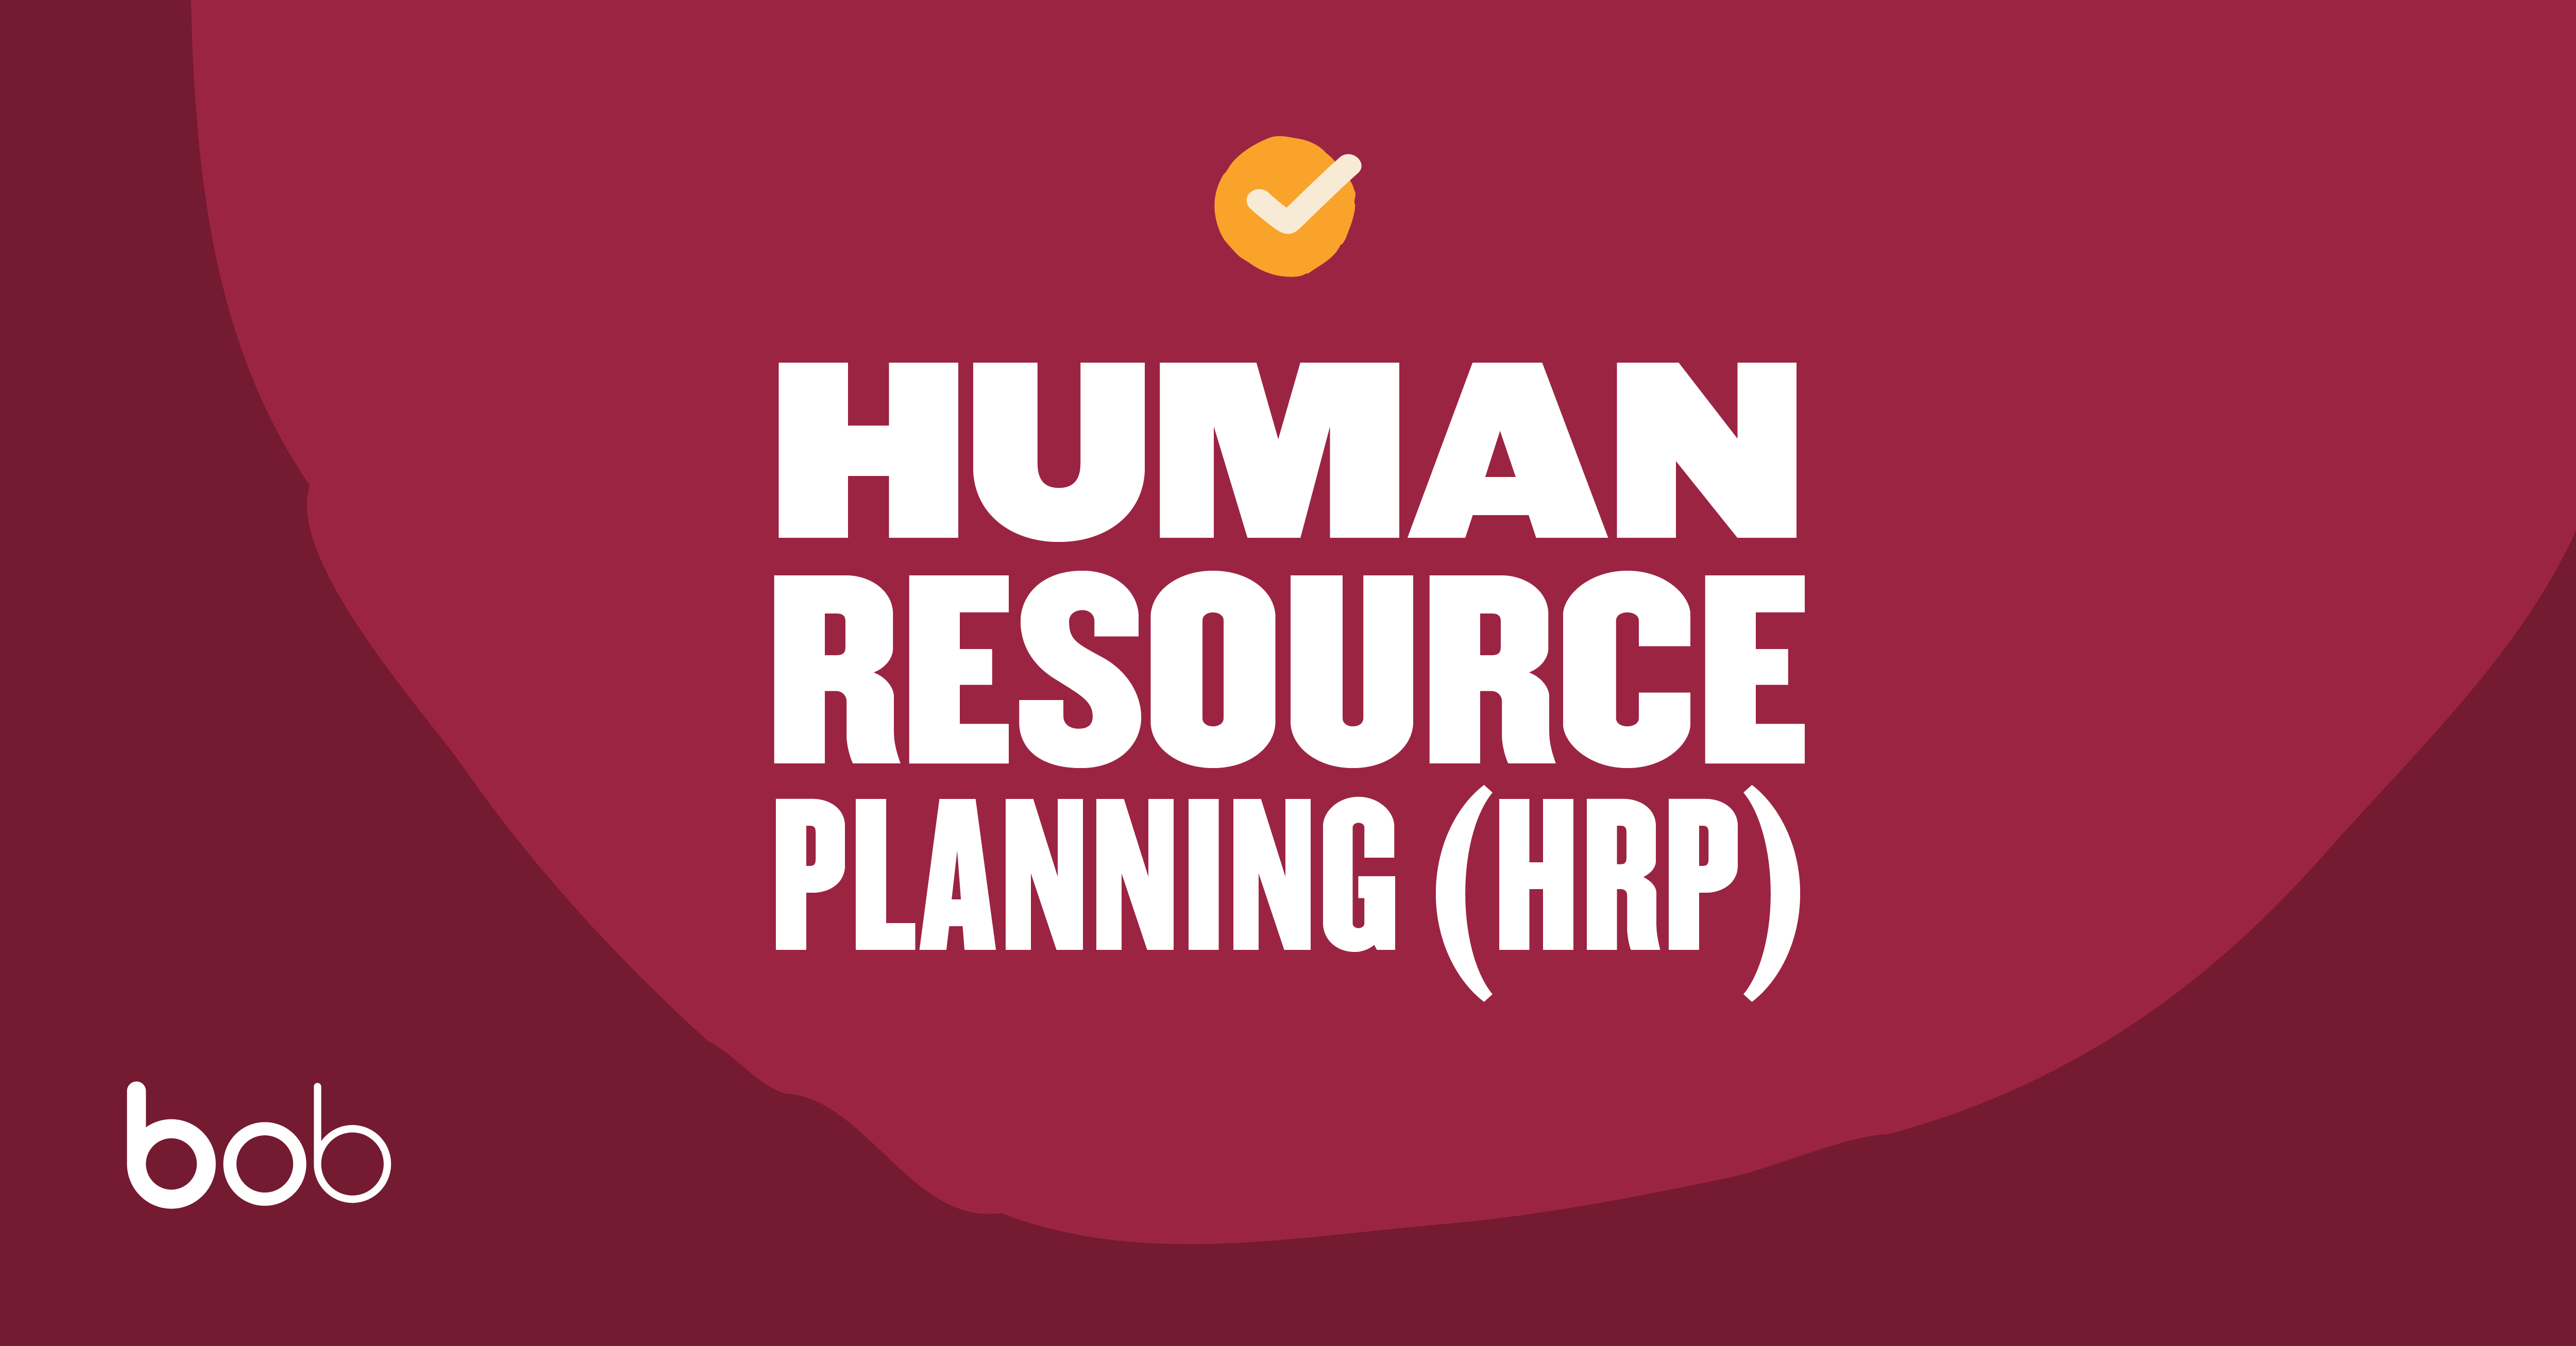 Re)Alignment of Human Resources Value: A Case Study